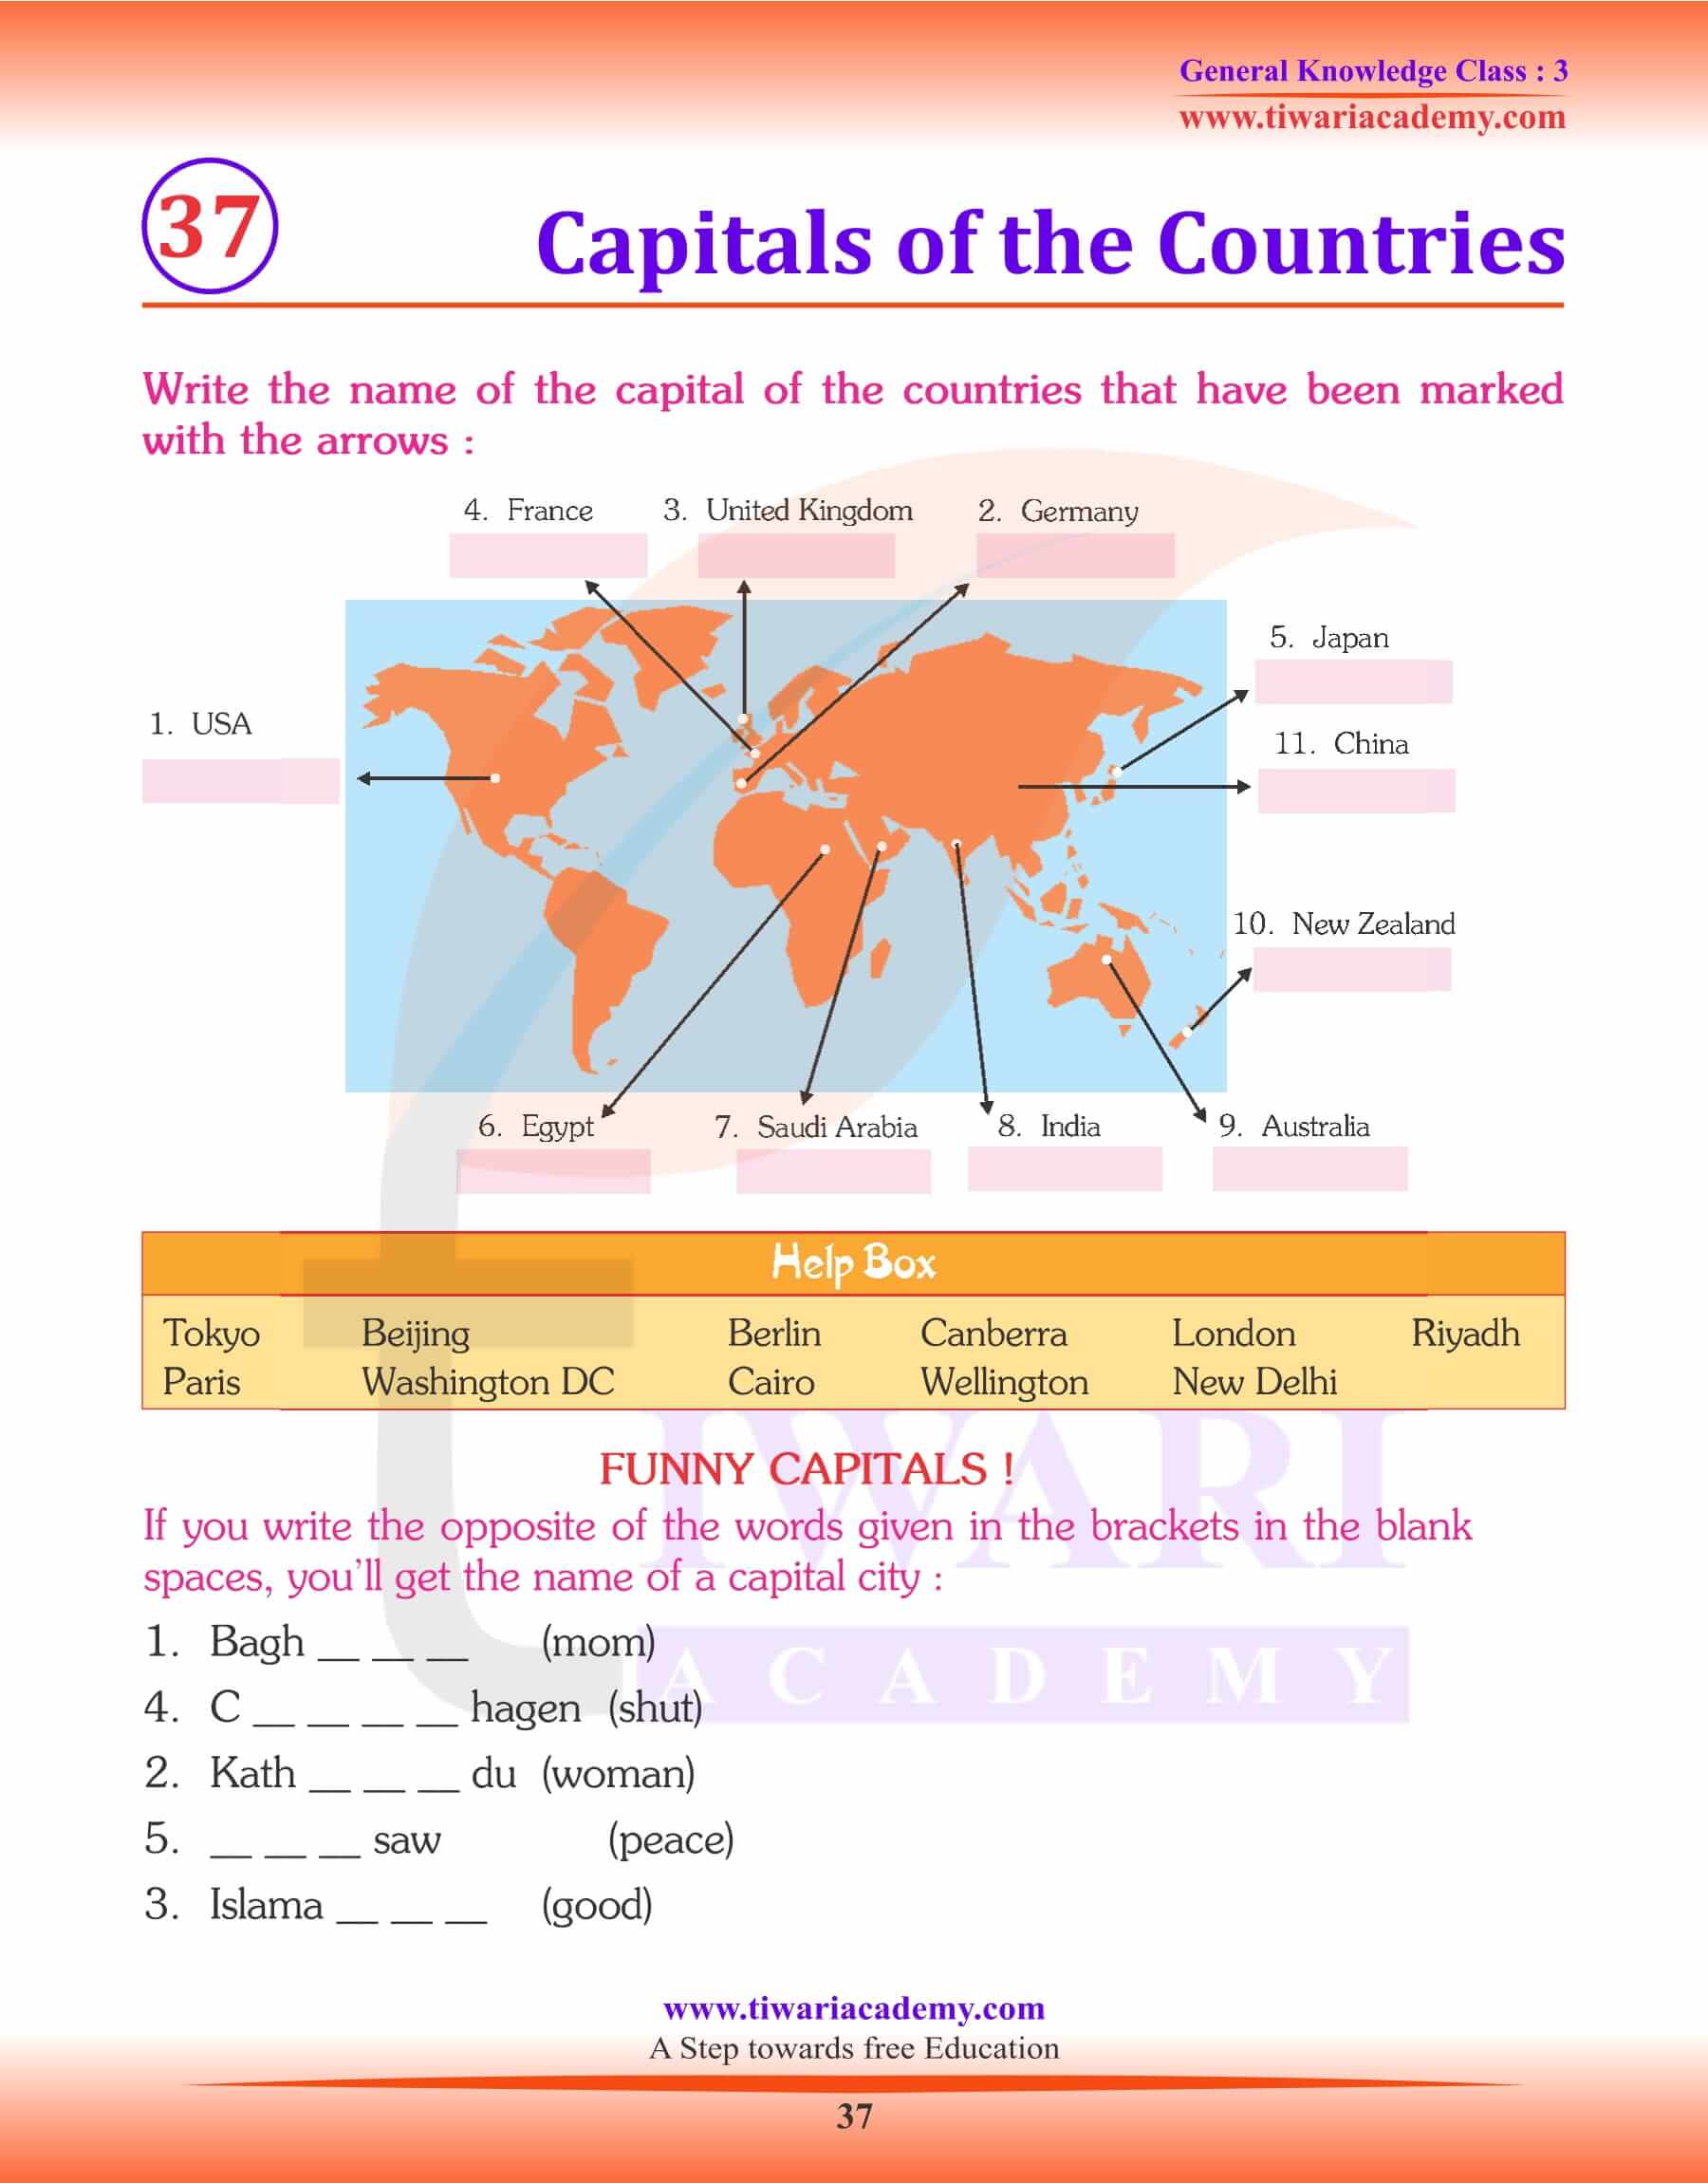 Capitals of the Countries